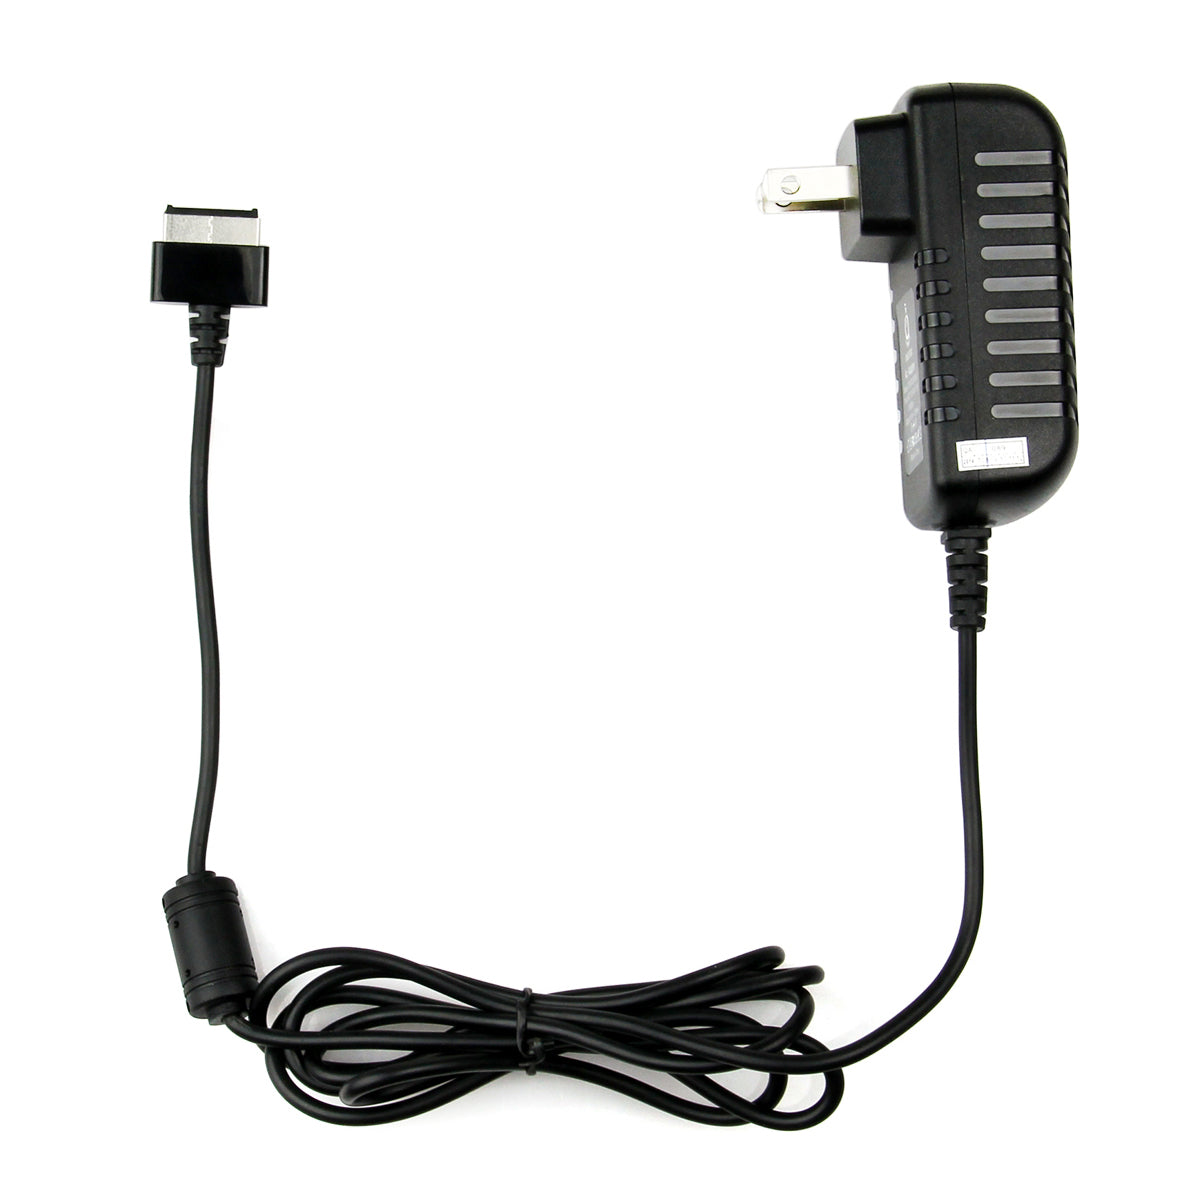 AC Adapter Charger for ASUS TF300T A1 Eee Pad.